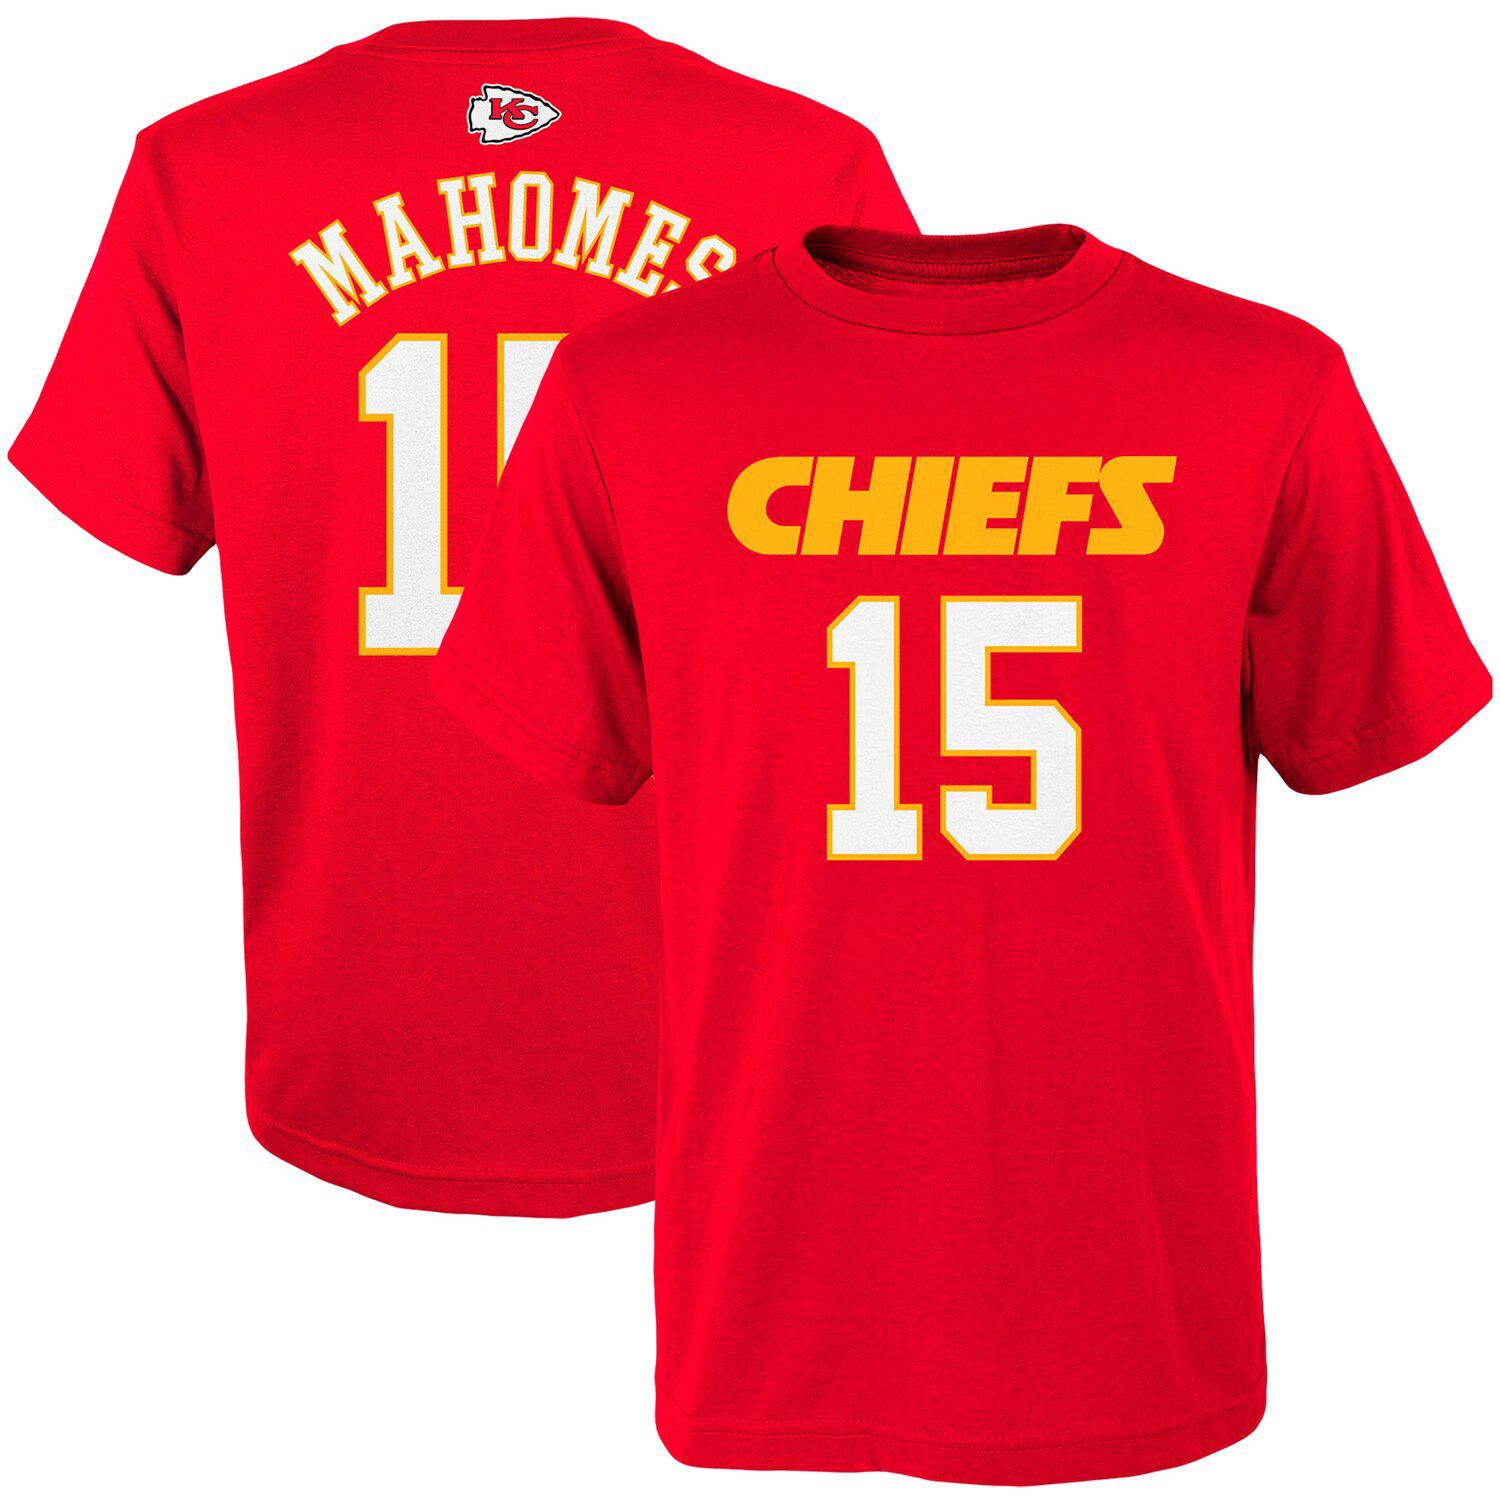 mahomes jersey number